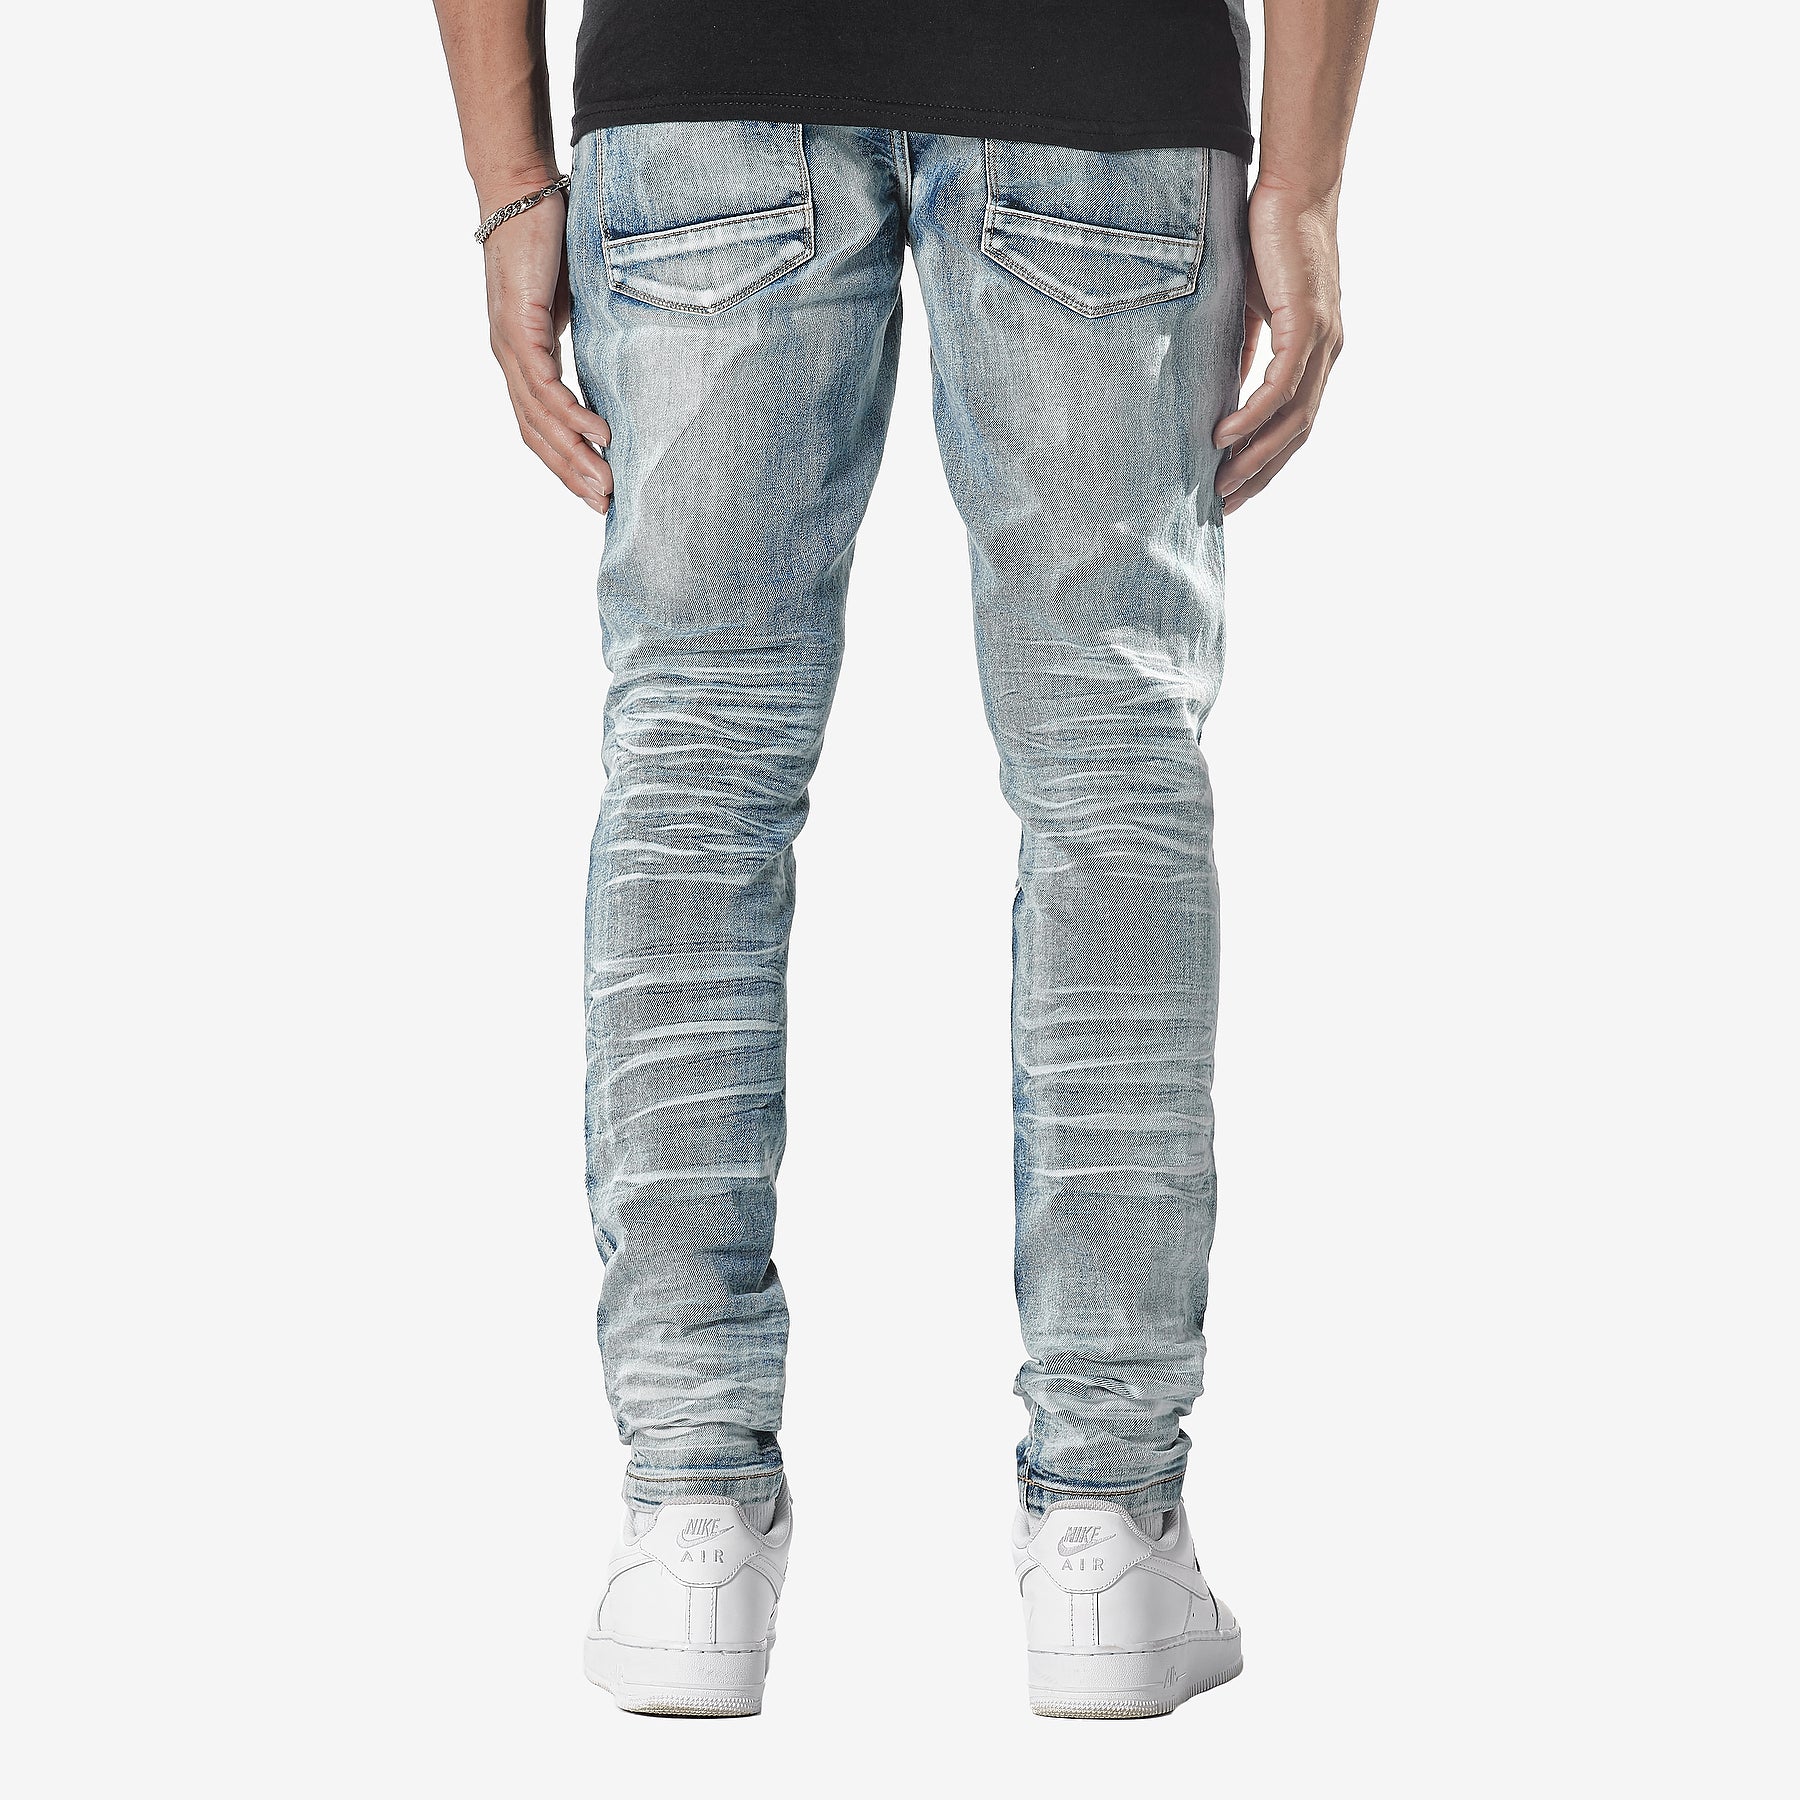 LIGHT TINT BLUE JEANS WITH RIP & REPAIR